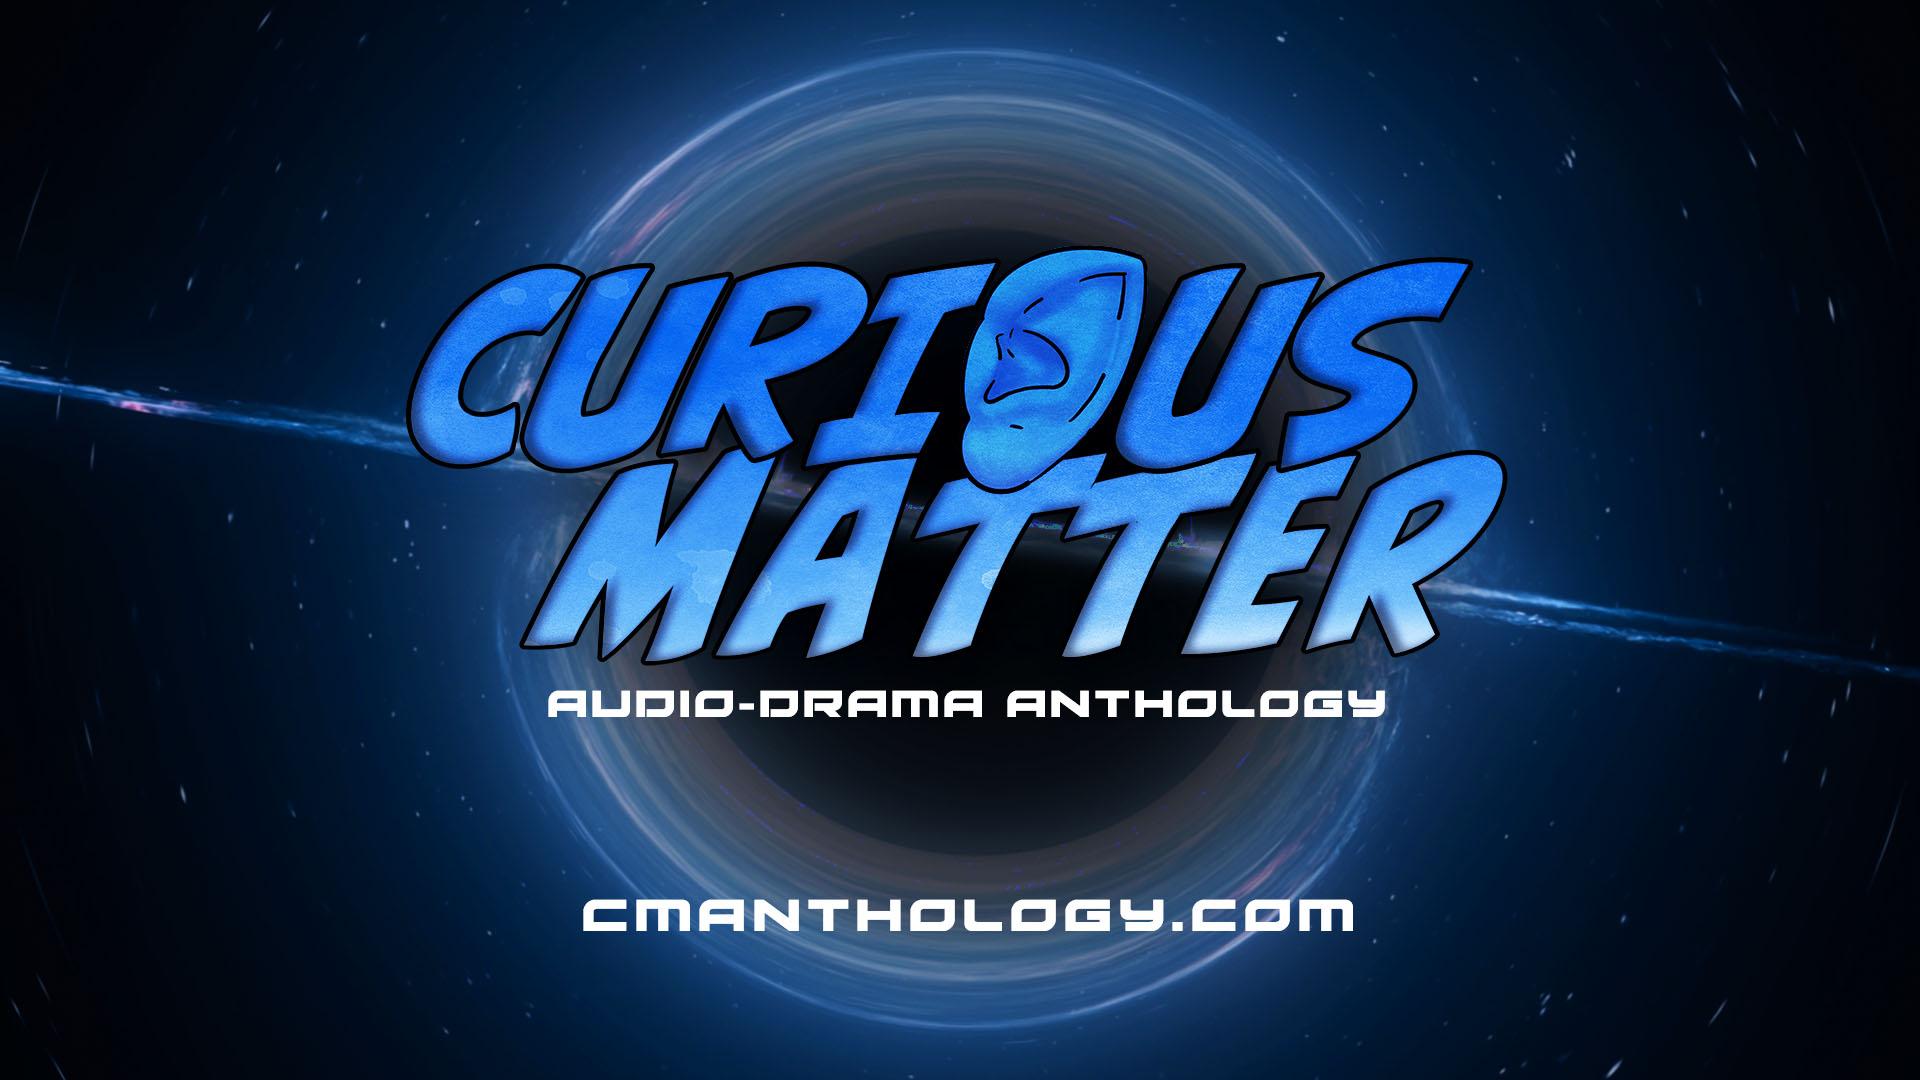 Curious Matter Anthology (Video Submissions) 